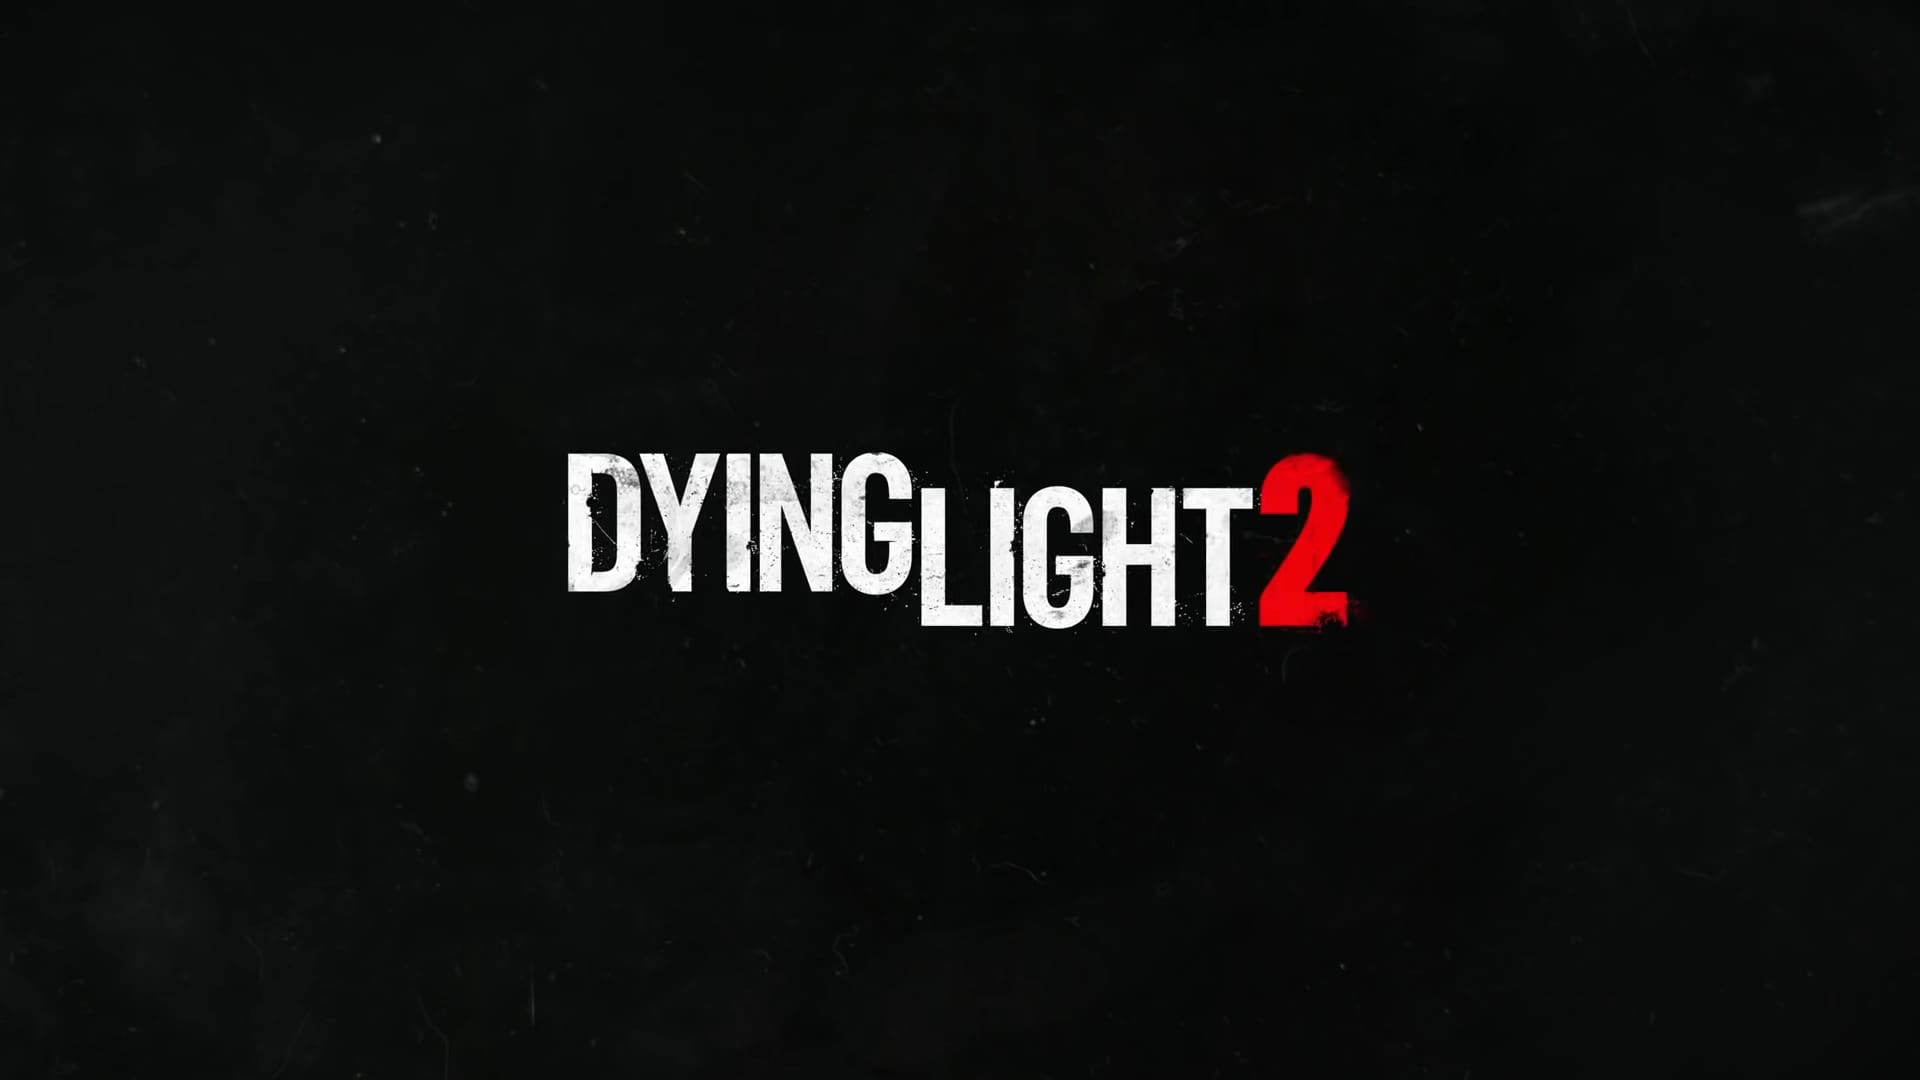 Dying Light 2 delayed